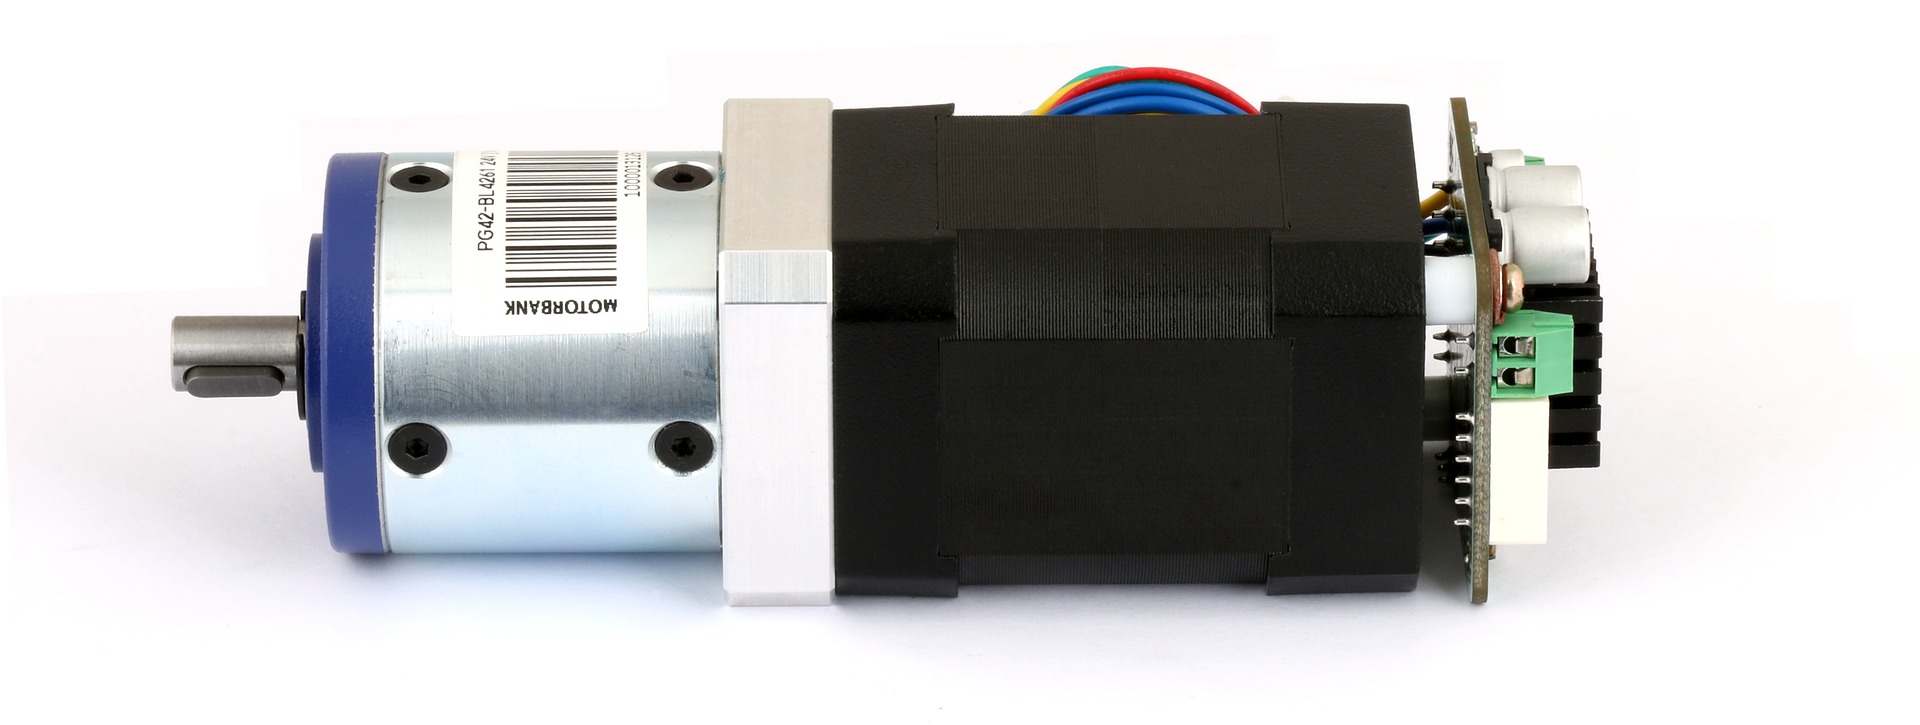 Permanent Magnet, Universal, and Brushless DC Motors